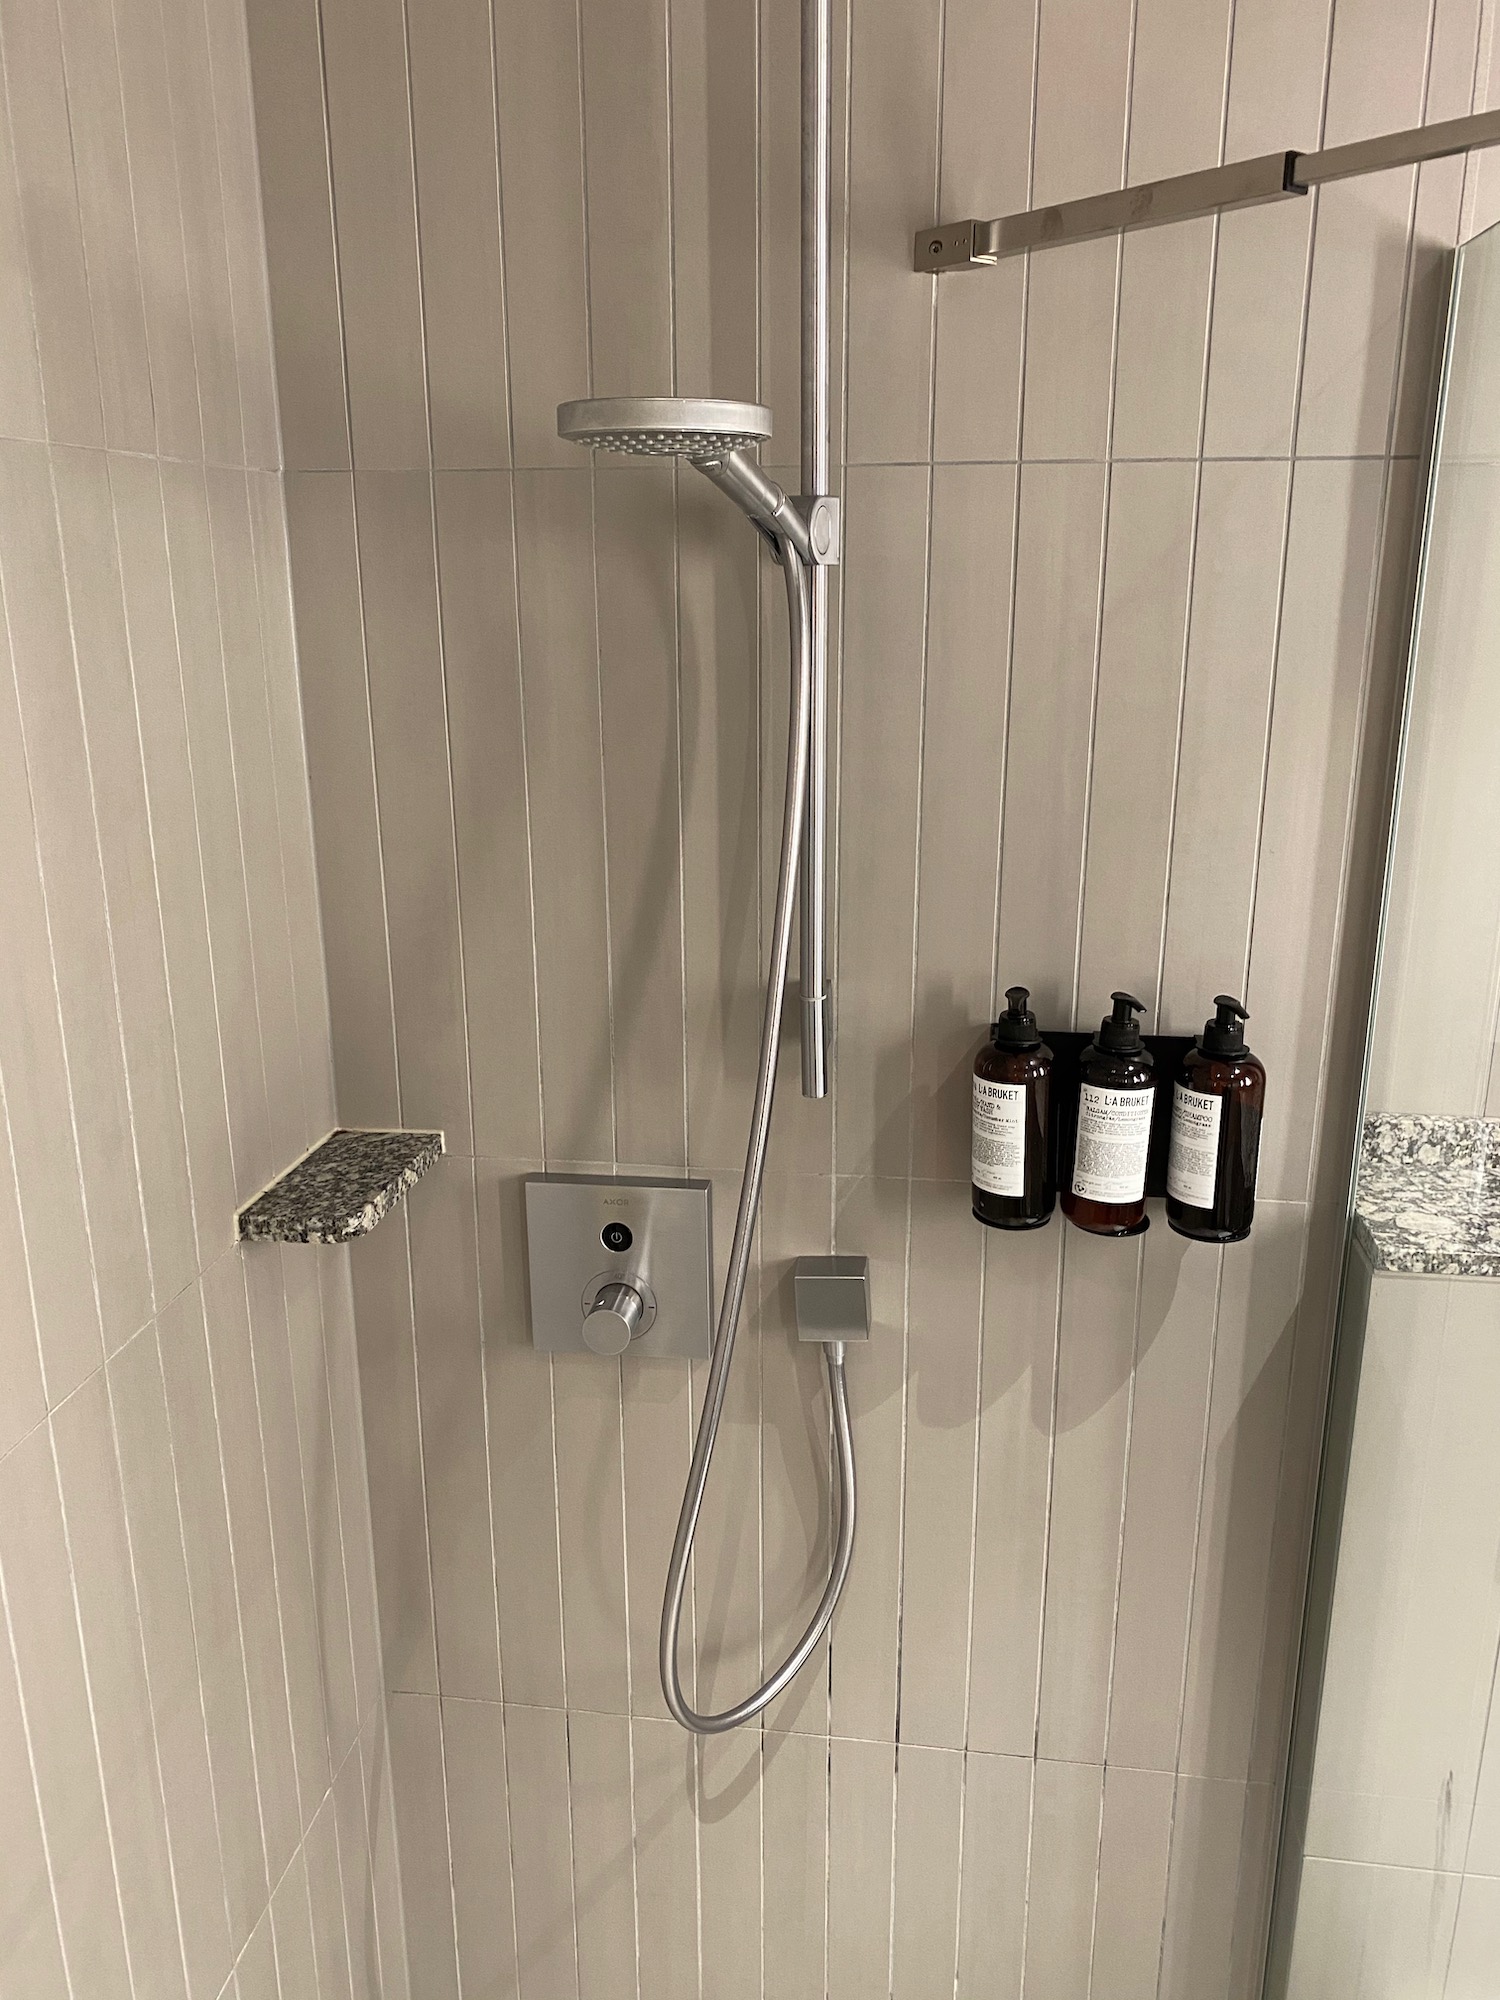 a shower head and bottles on the wall